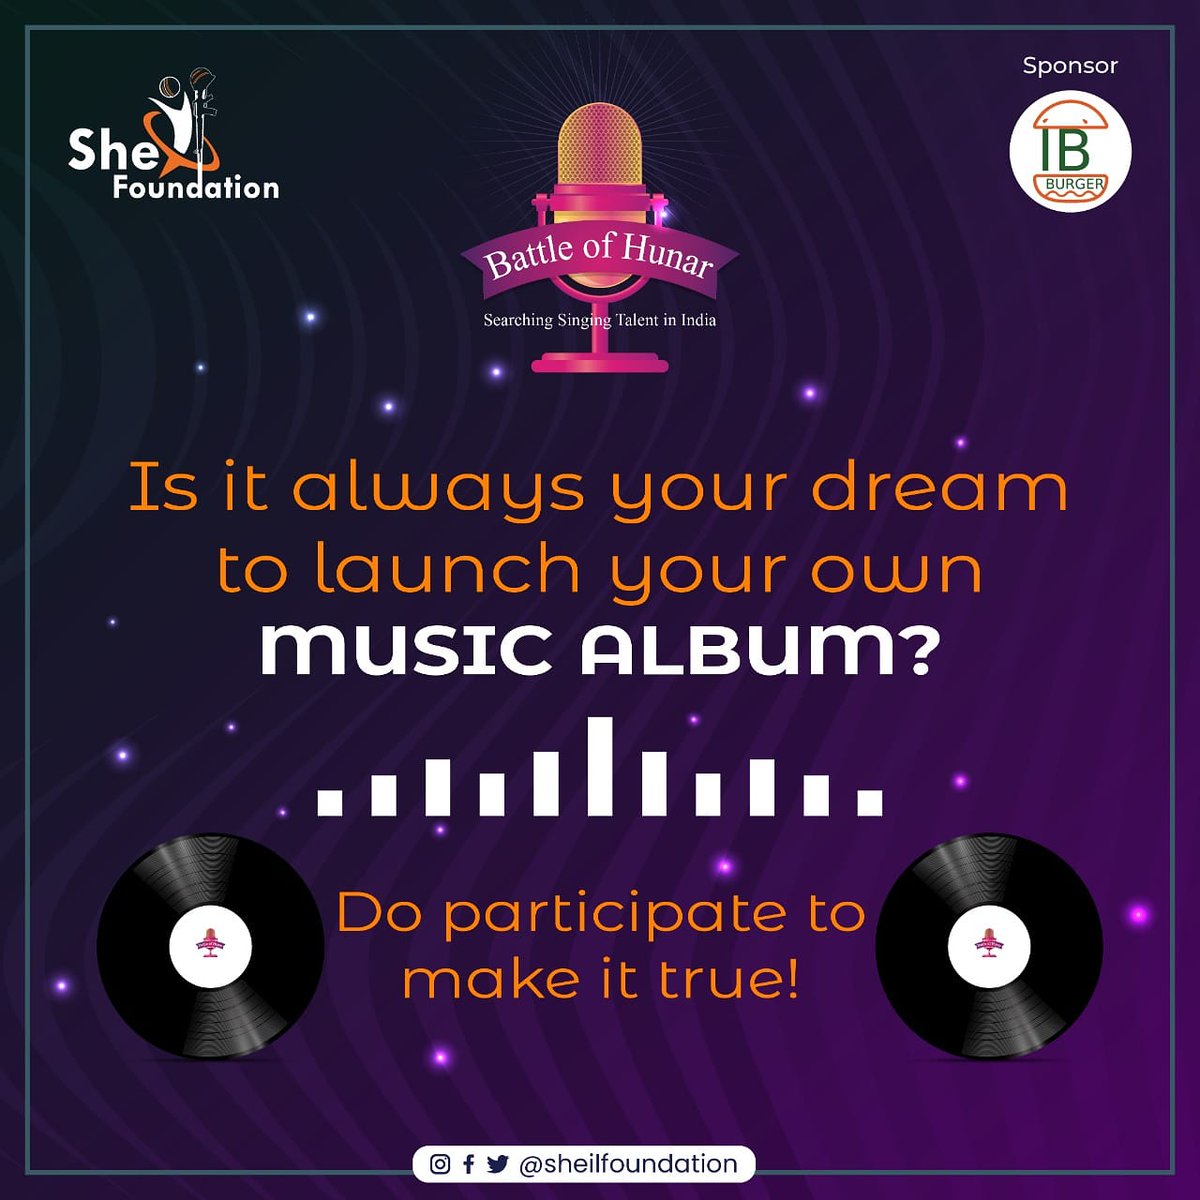 Sing, Record & Share. Discover Your Inner Talent. Its your time!

Do register!! 
Visit link for more information- sheilfoundation.com/battle-of-huna…
#SheilFoundation #SingingCompetition #BattleofHunar
#NGO #socialwork
#lockdown #lockdown2021
#Mumbai #Maharashtra #India
#MumbaiSingers